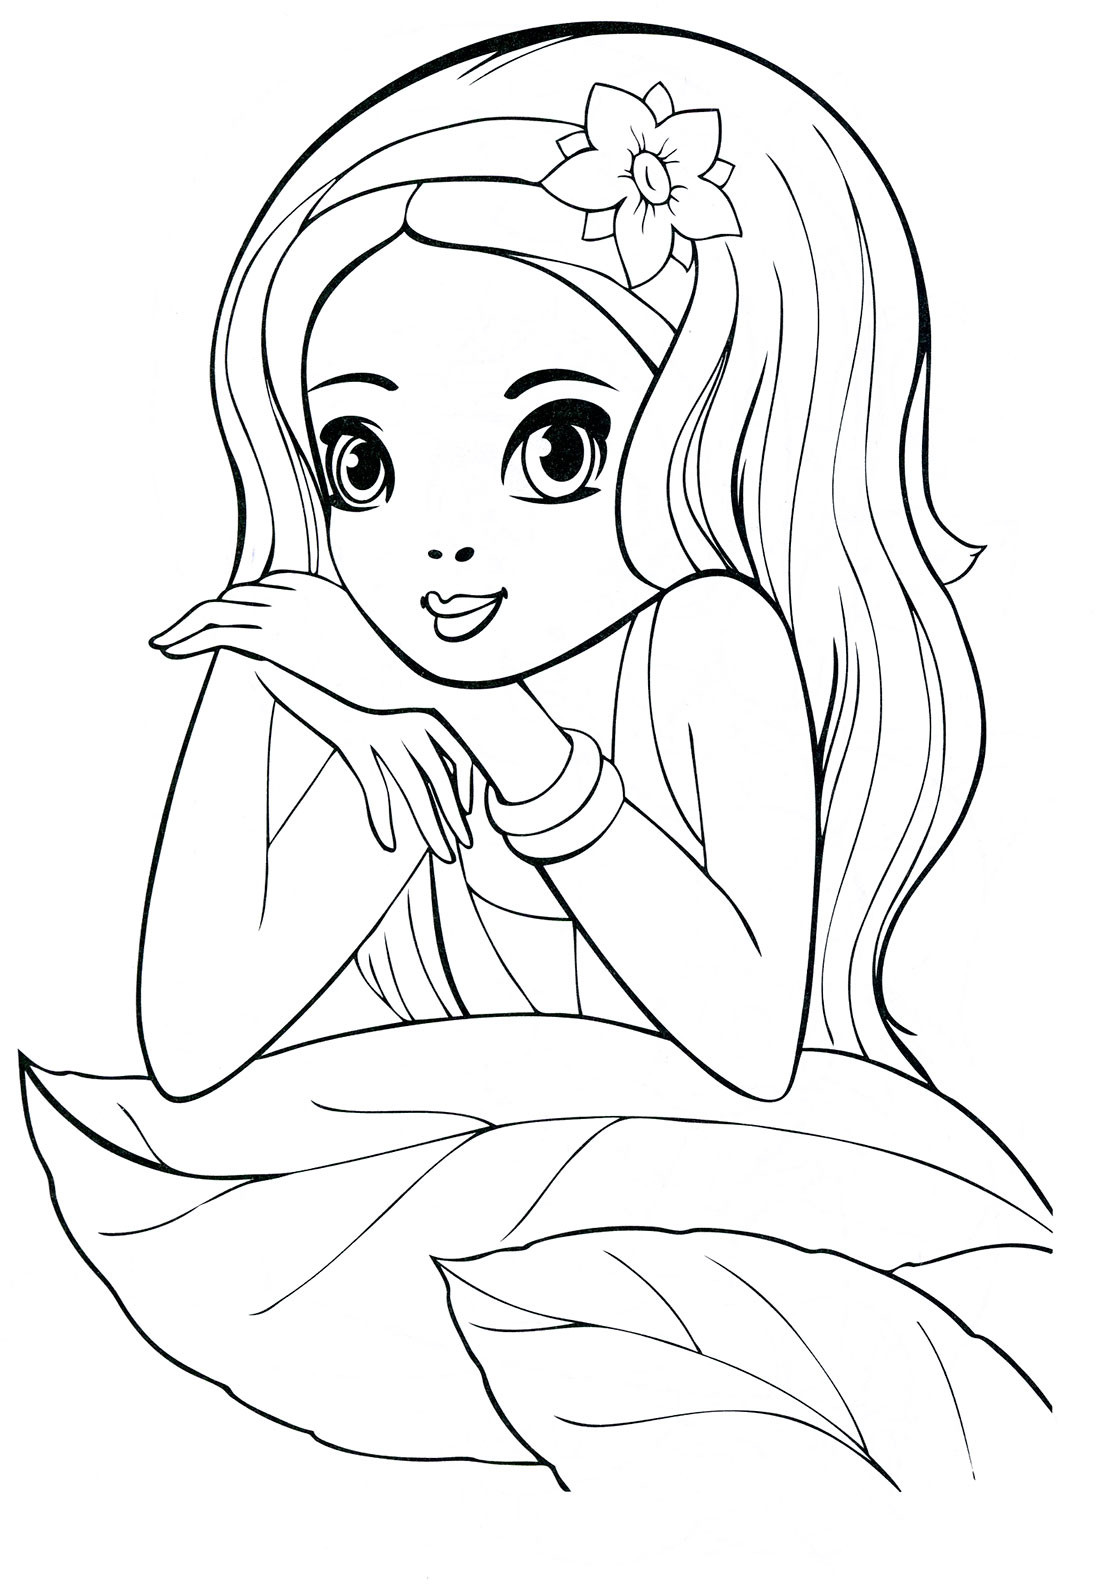 Coloring Pages Of Girls
 Coloring pages for 8 9 10 year old girls to and